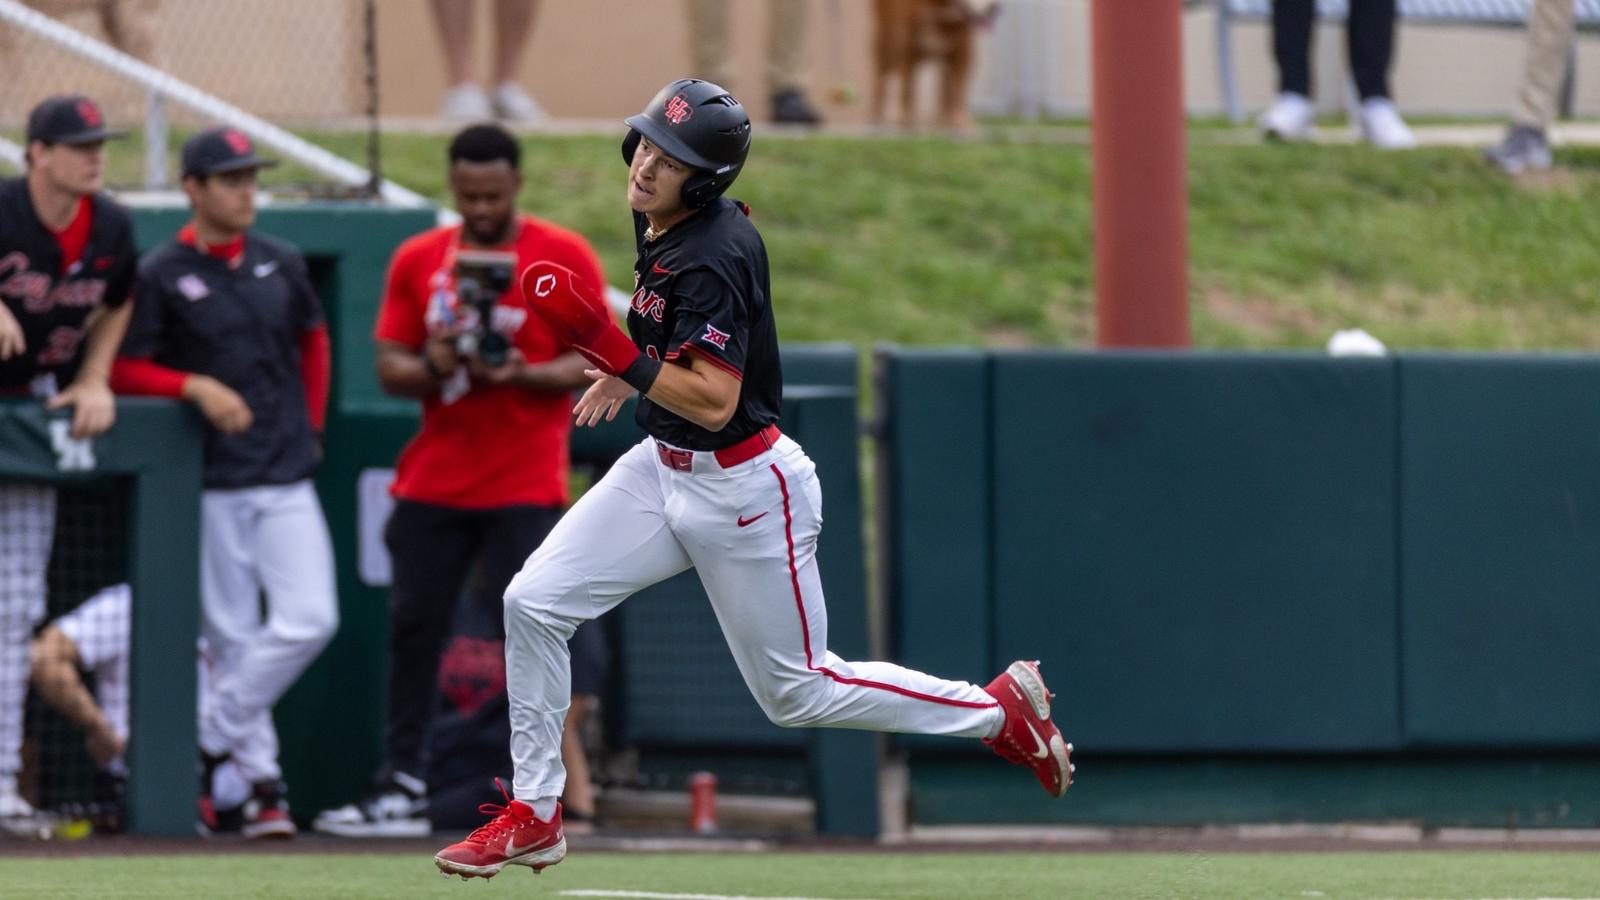 Houston Baseball Takes on McNeese in Midweek Showdown: Key Players Leading the Charge